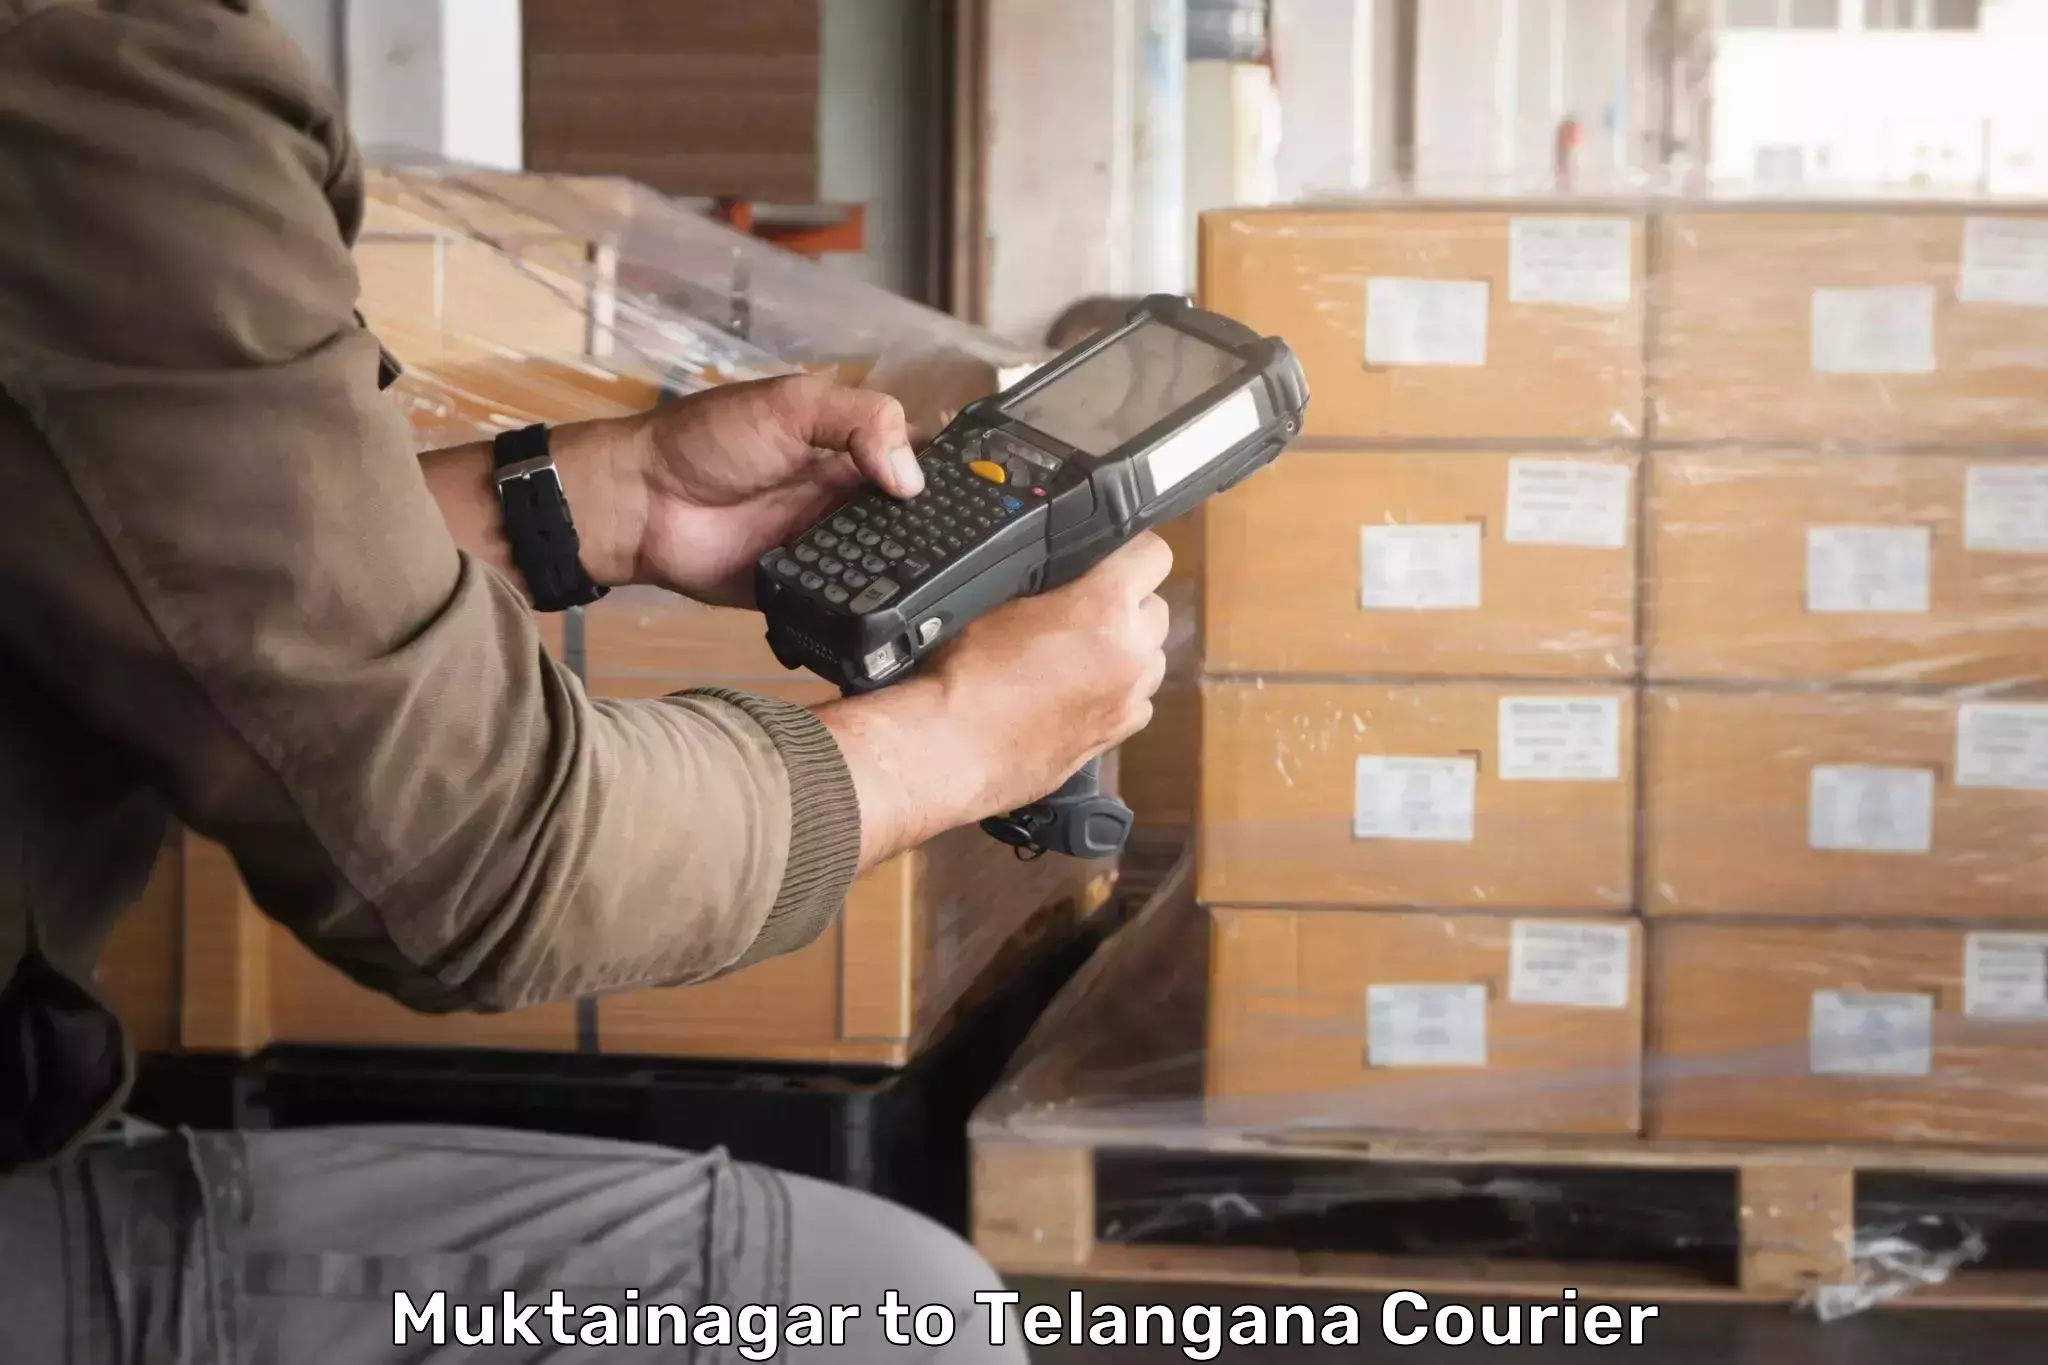 Large-scale shipping solutions Muktainagar to Mogulla Pally